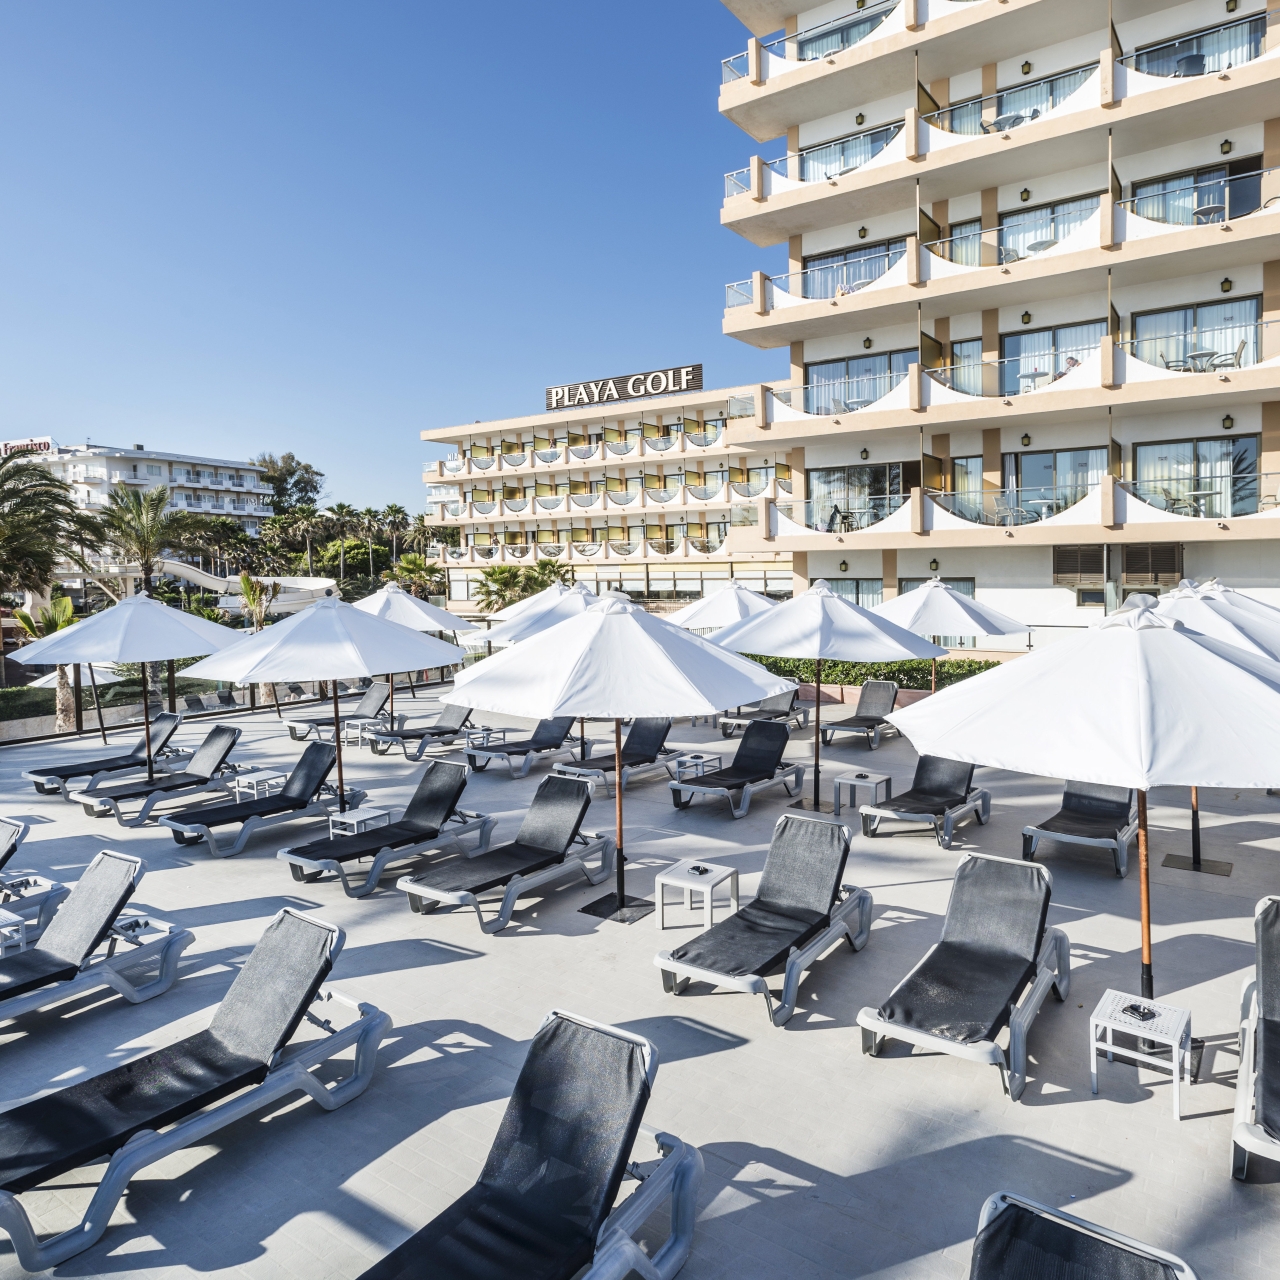 Hotel Playa Golf 4*Sup Palma de Mallorca at HRS with free services